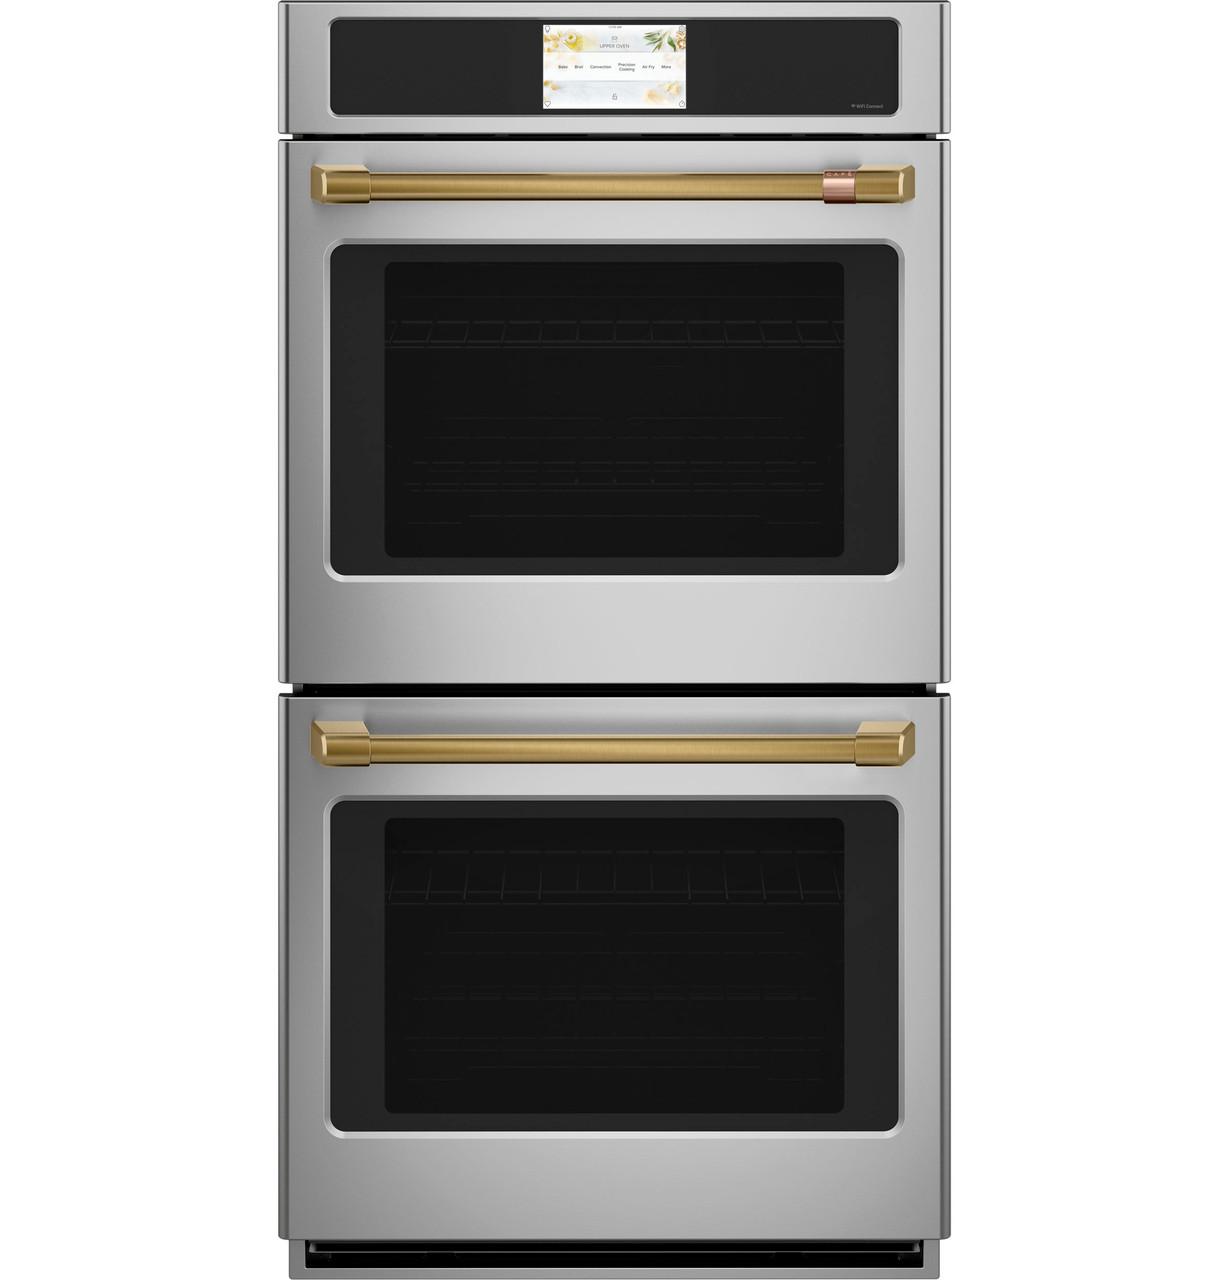 Cafe Caf(eback)™ 27" Smart Double Wall Oven with Convection